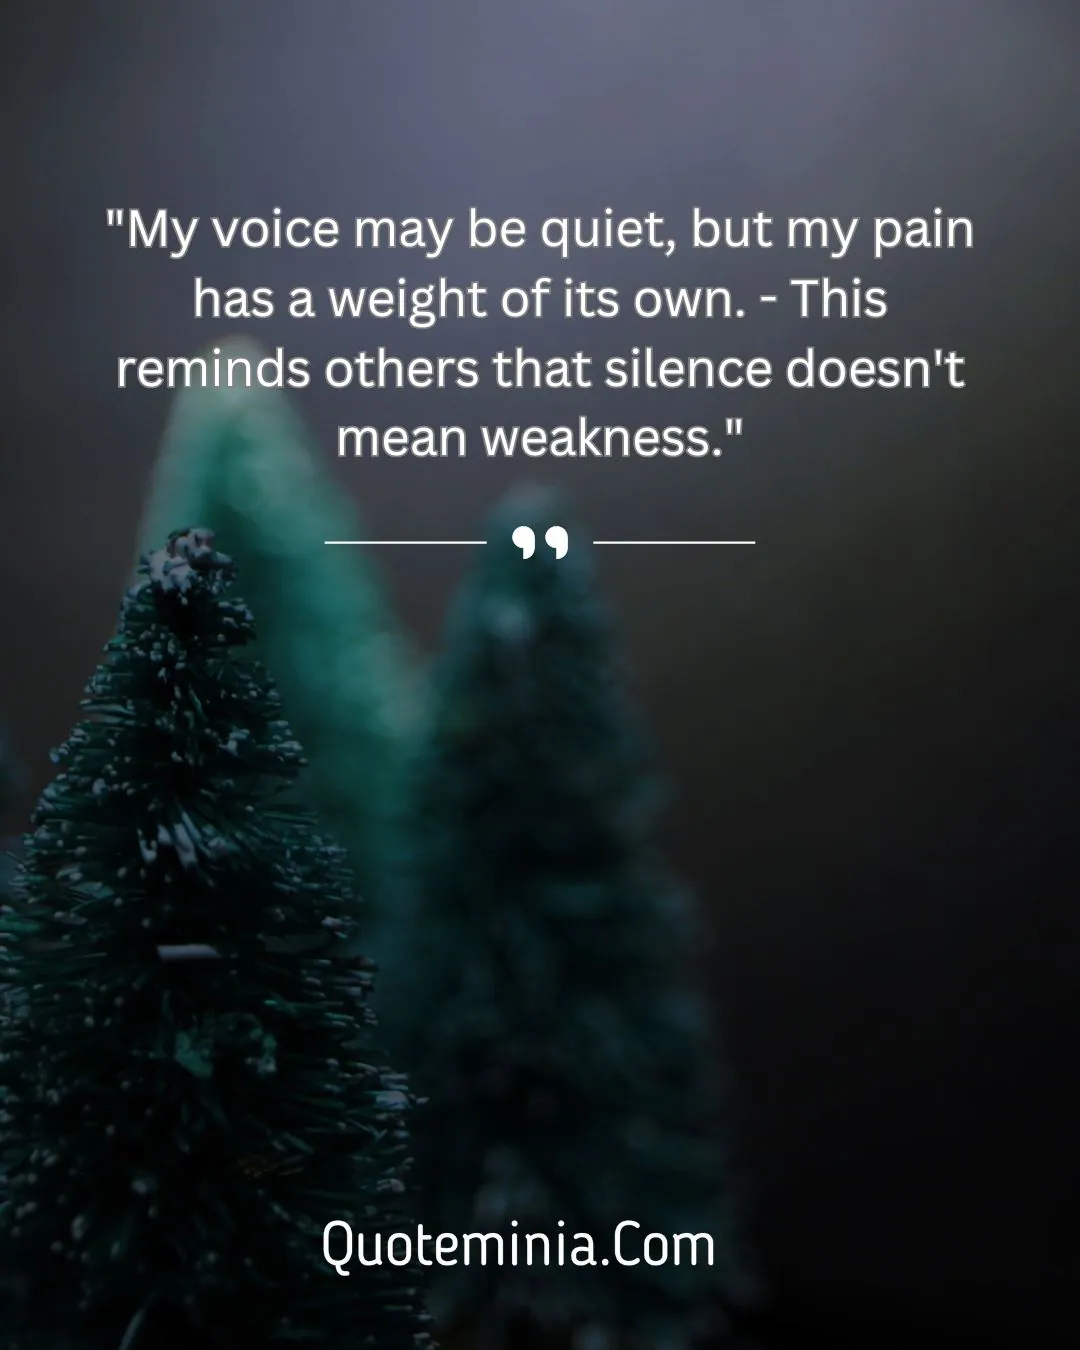 I Suffer in Silence Quotes Image 3